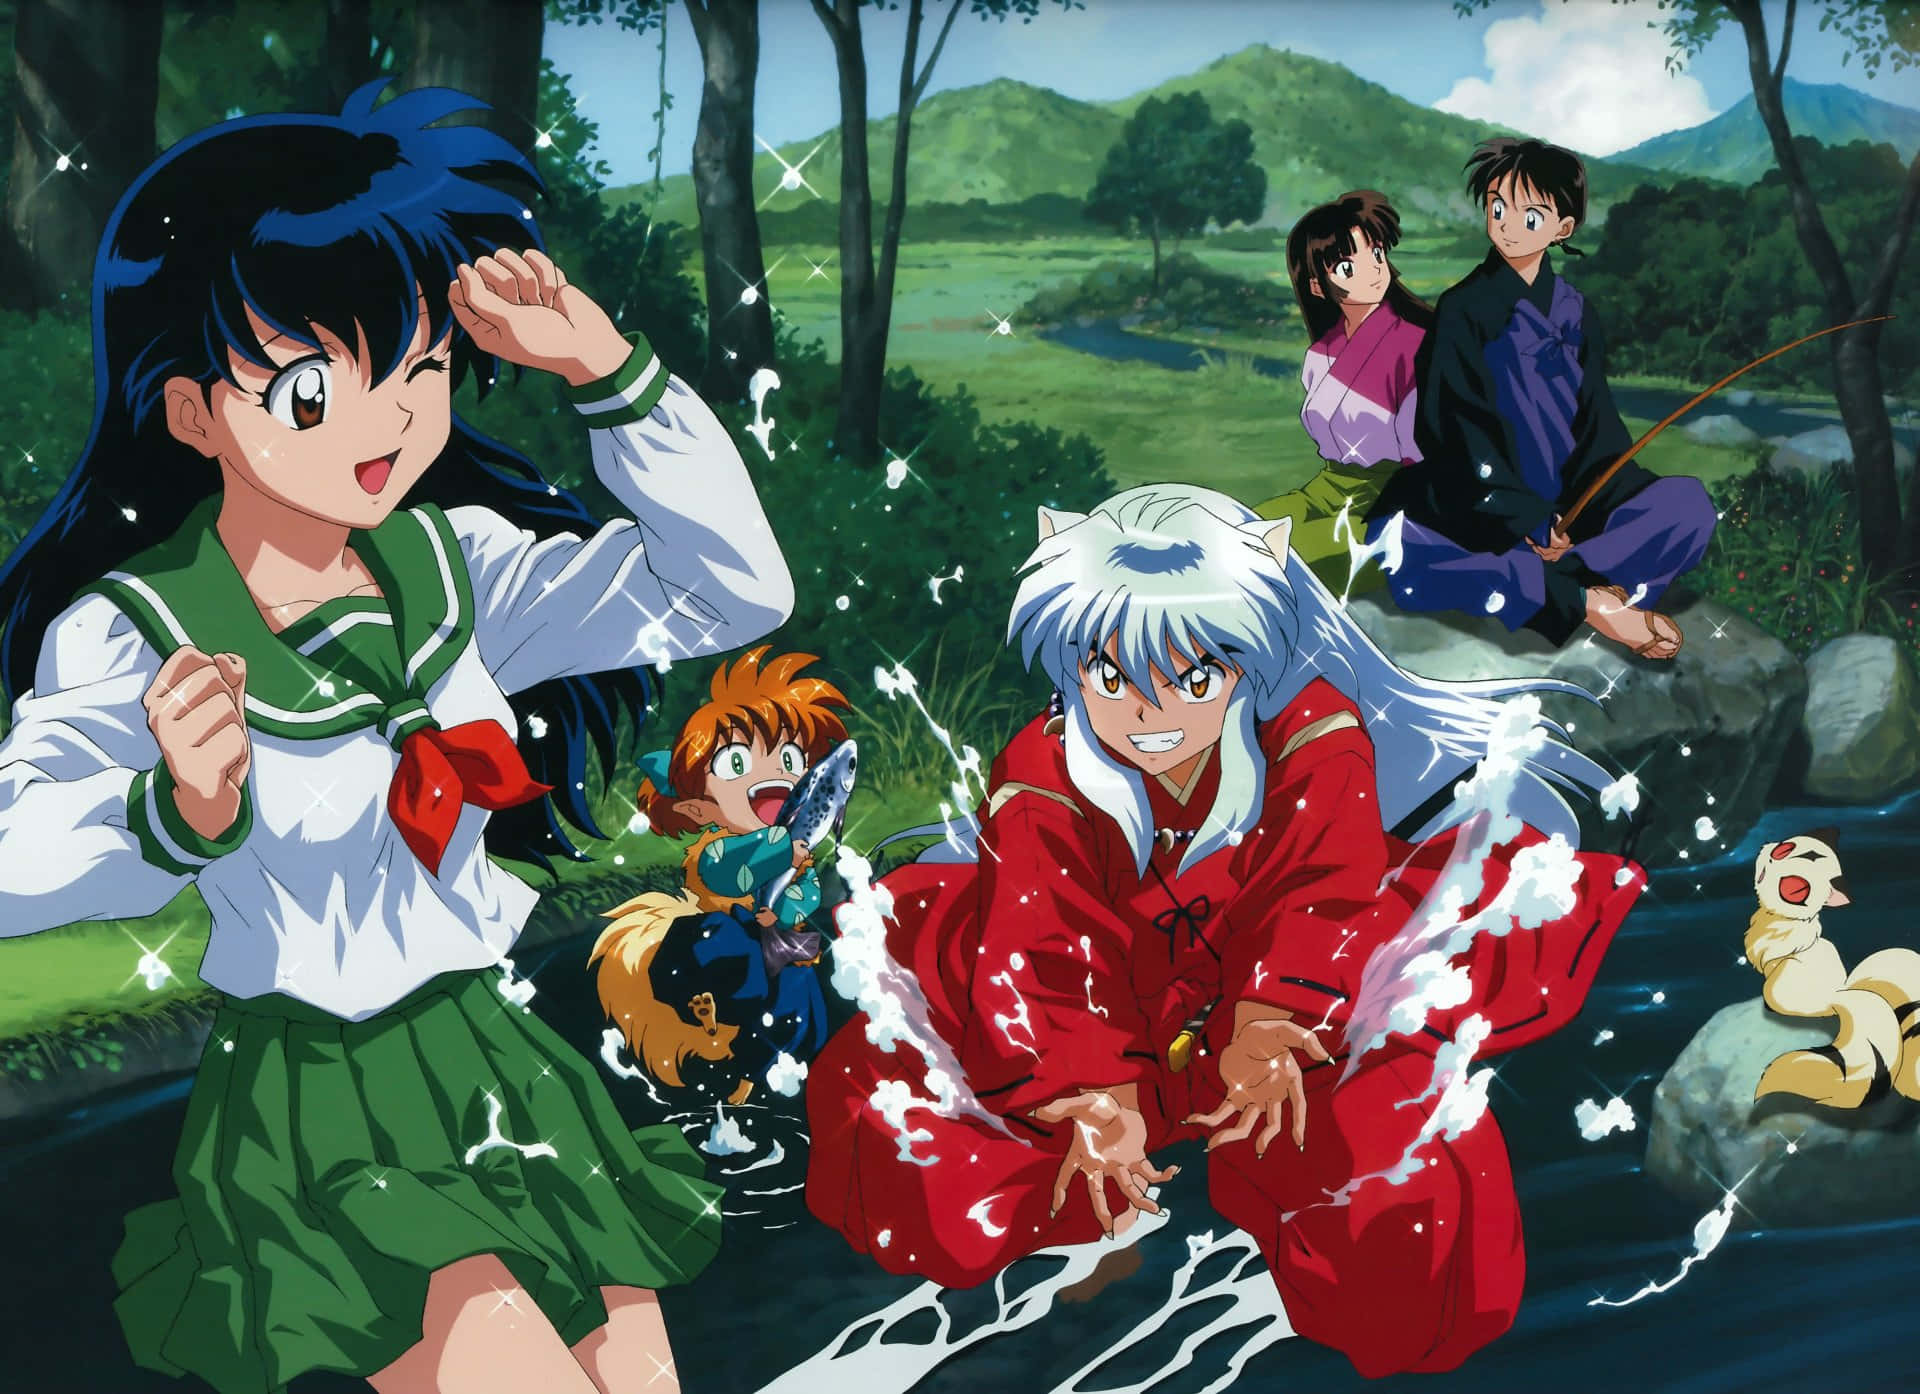 Inuyasha and his beloved Kagome embark on their giant adventure